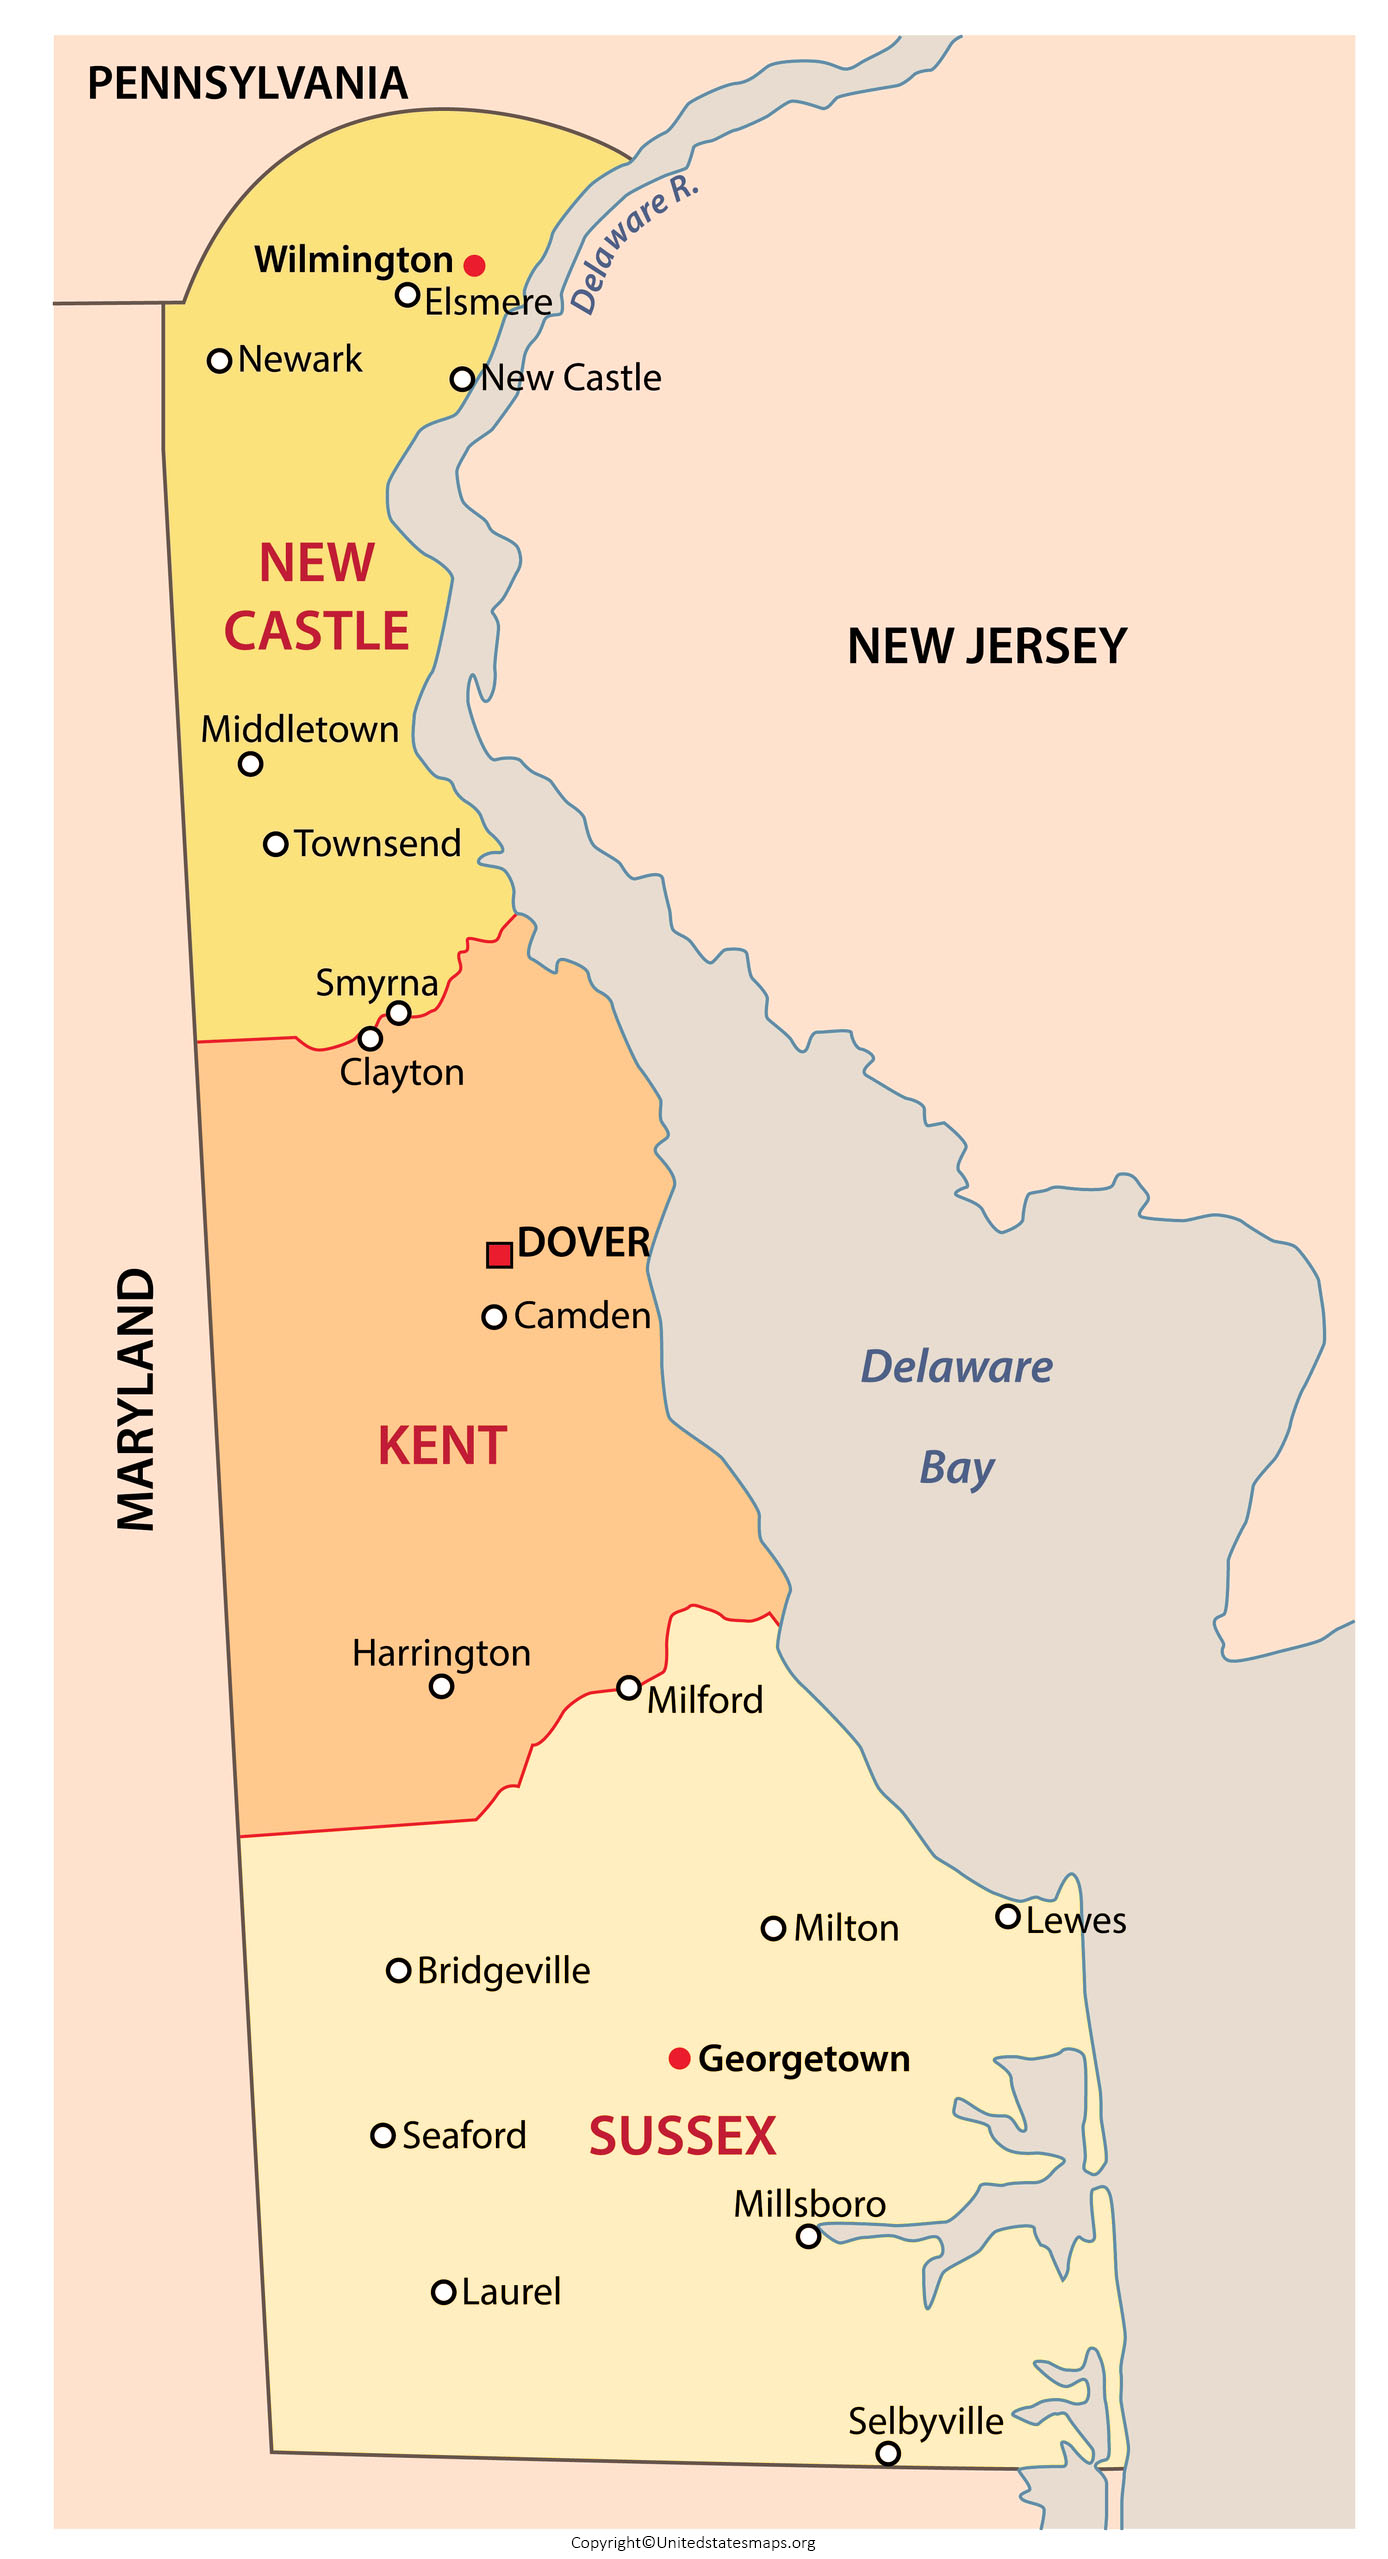 Delaware Map With Cities Labeled